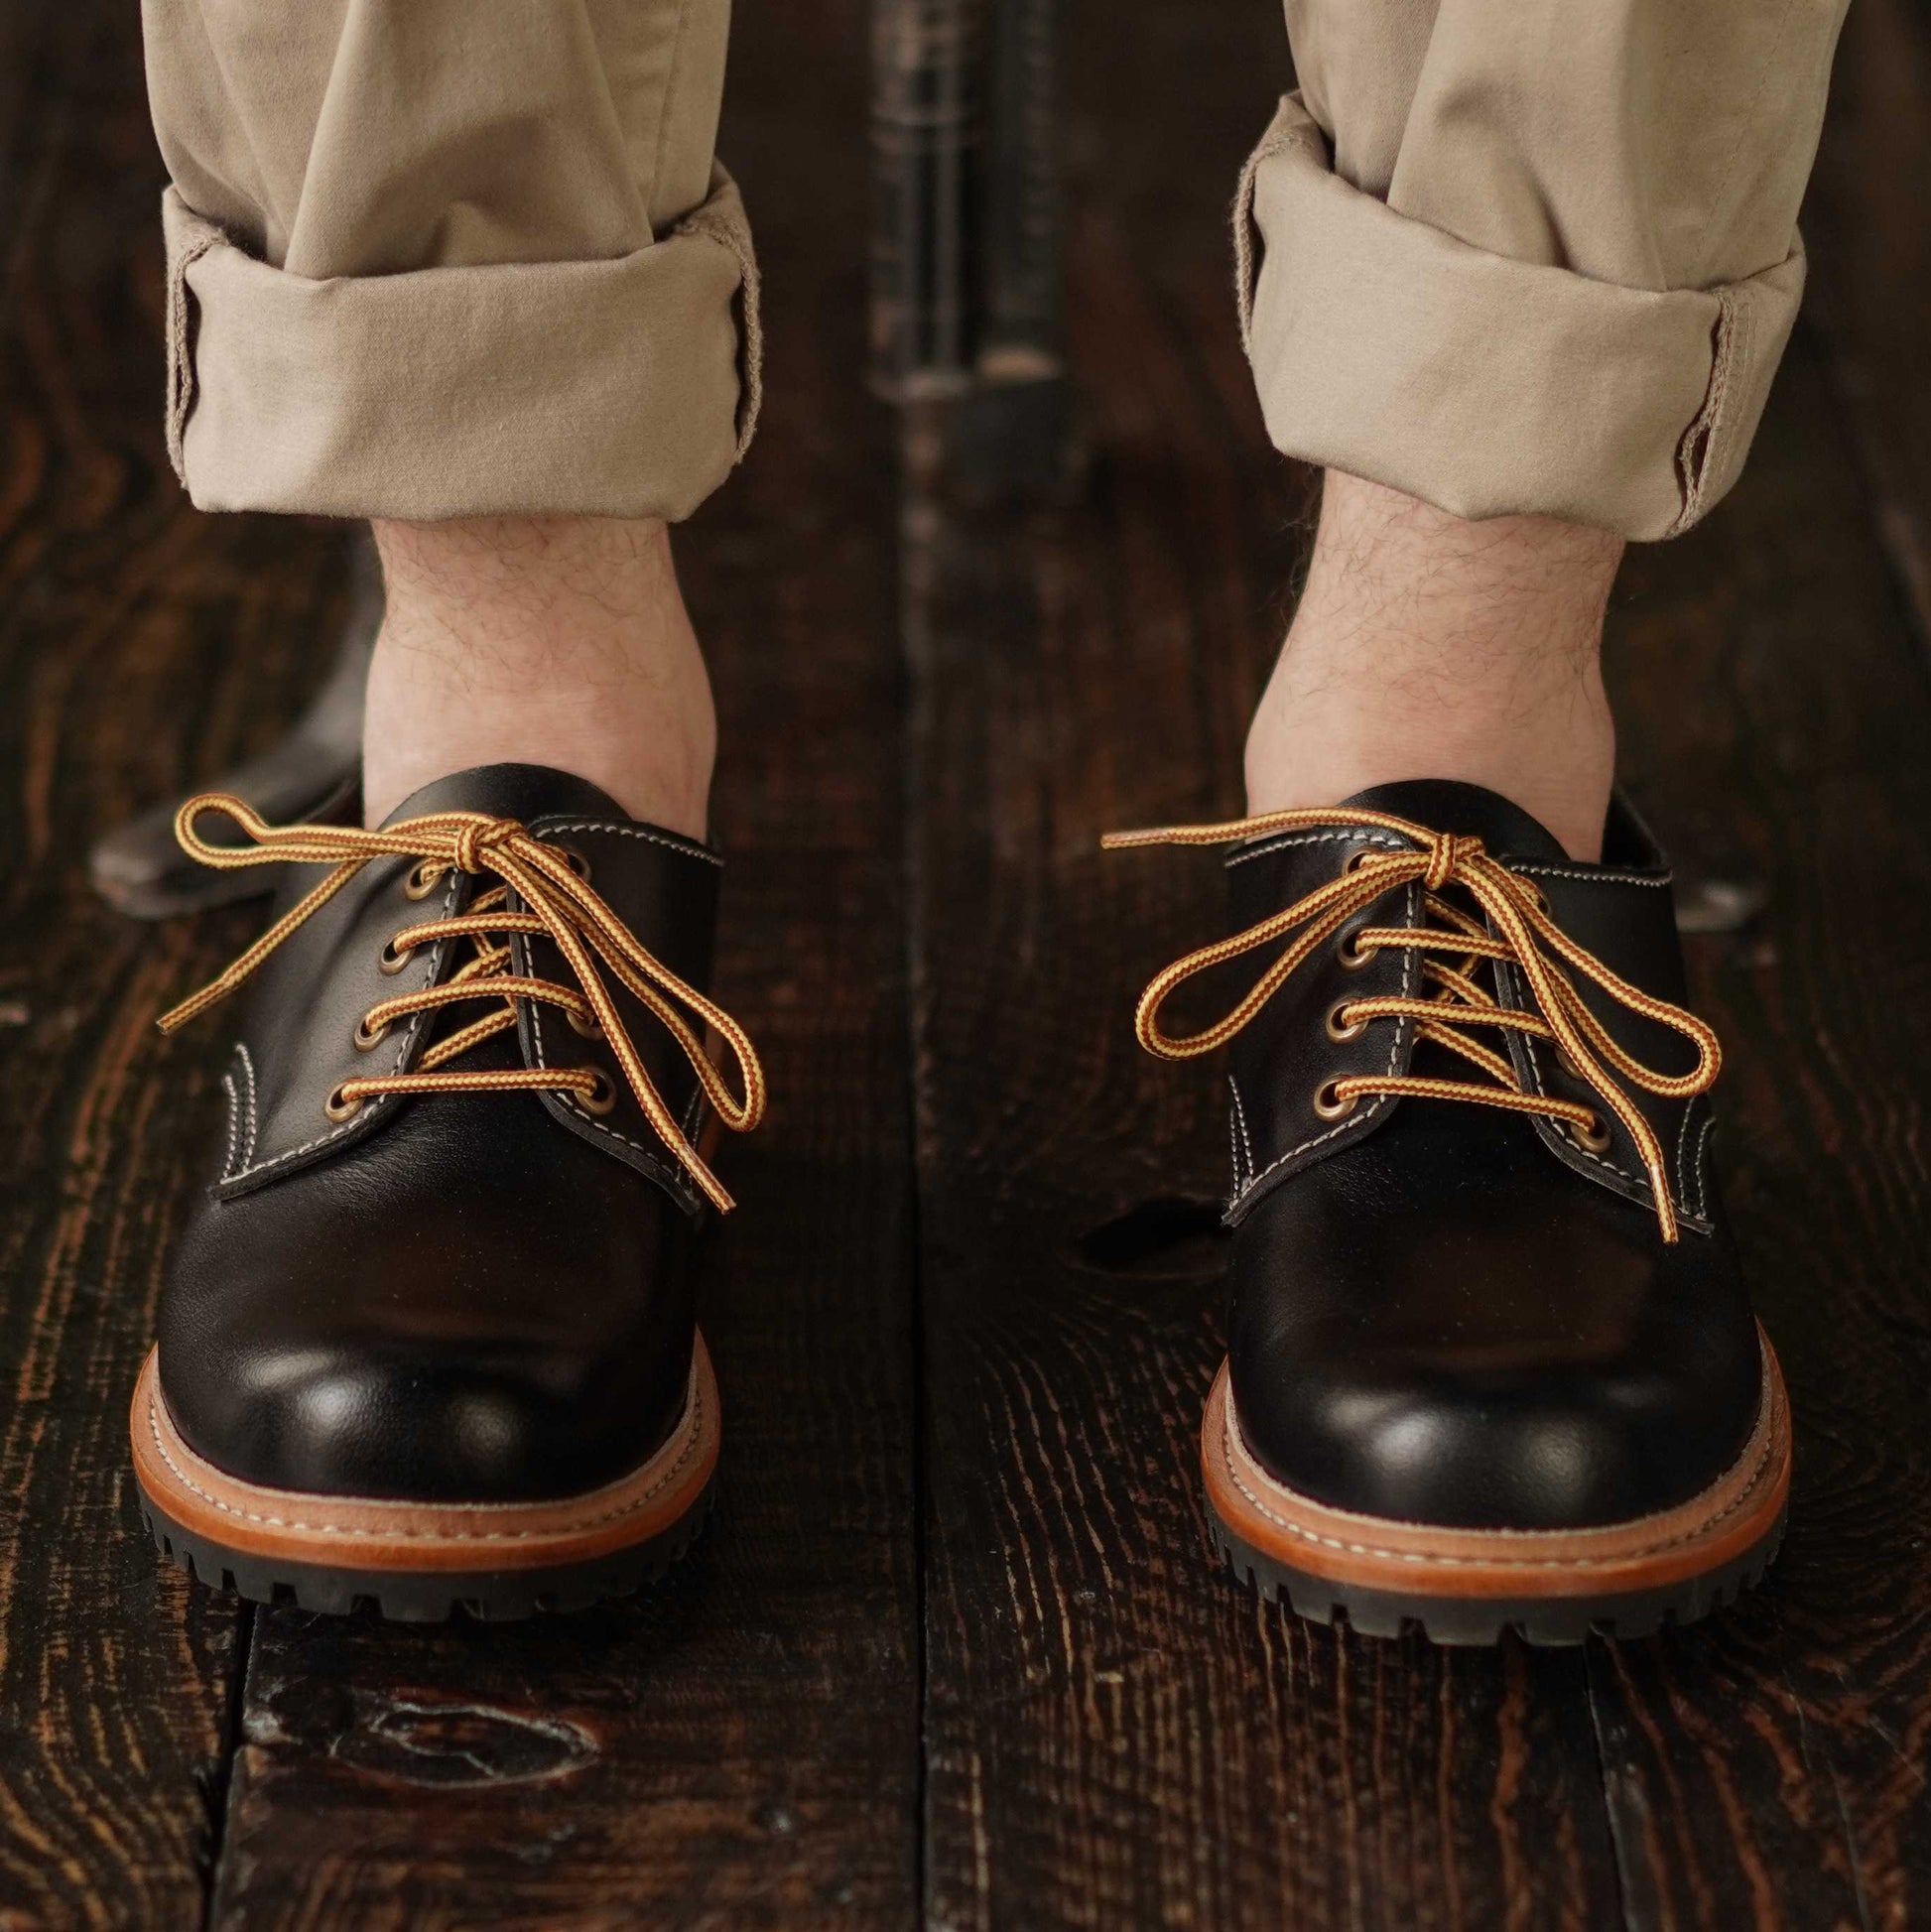 Chaussures Moc-Toe (Raven Black) Goodyear Welted – Craft & Glory